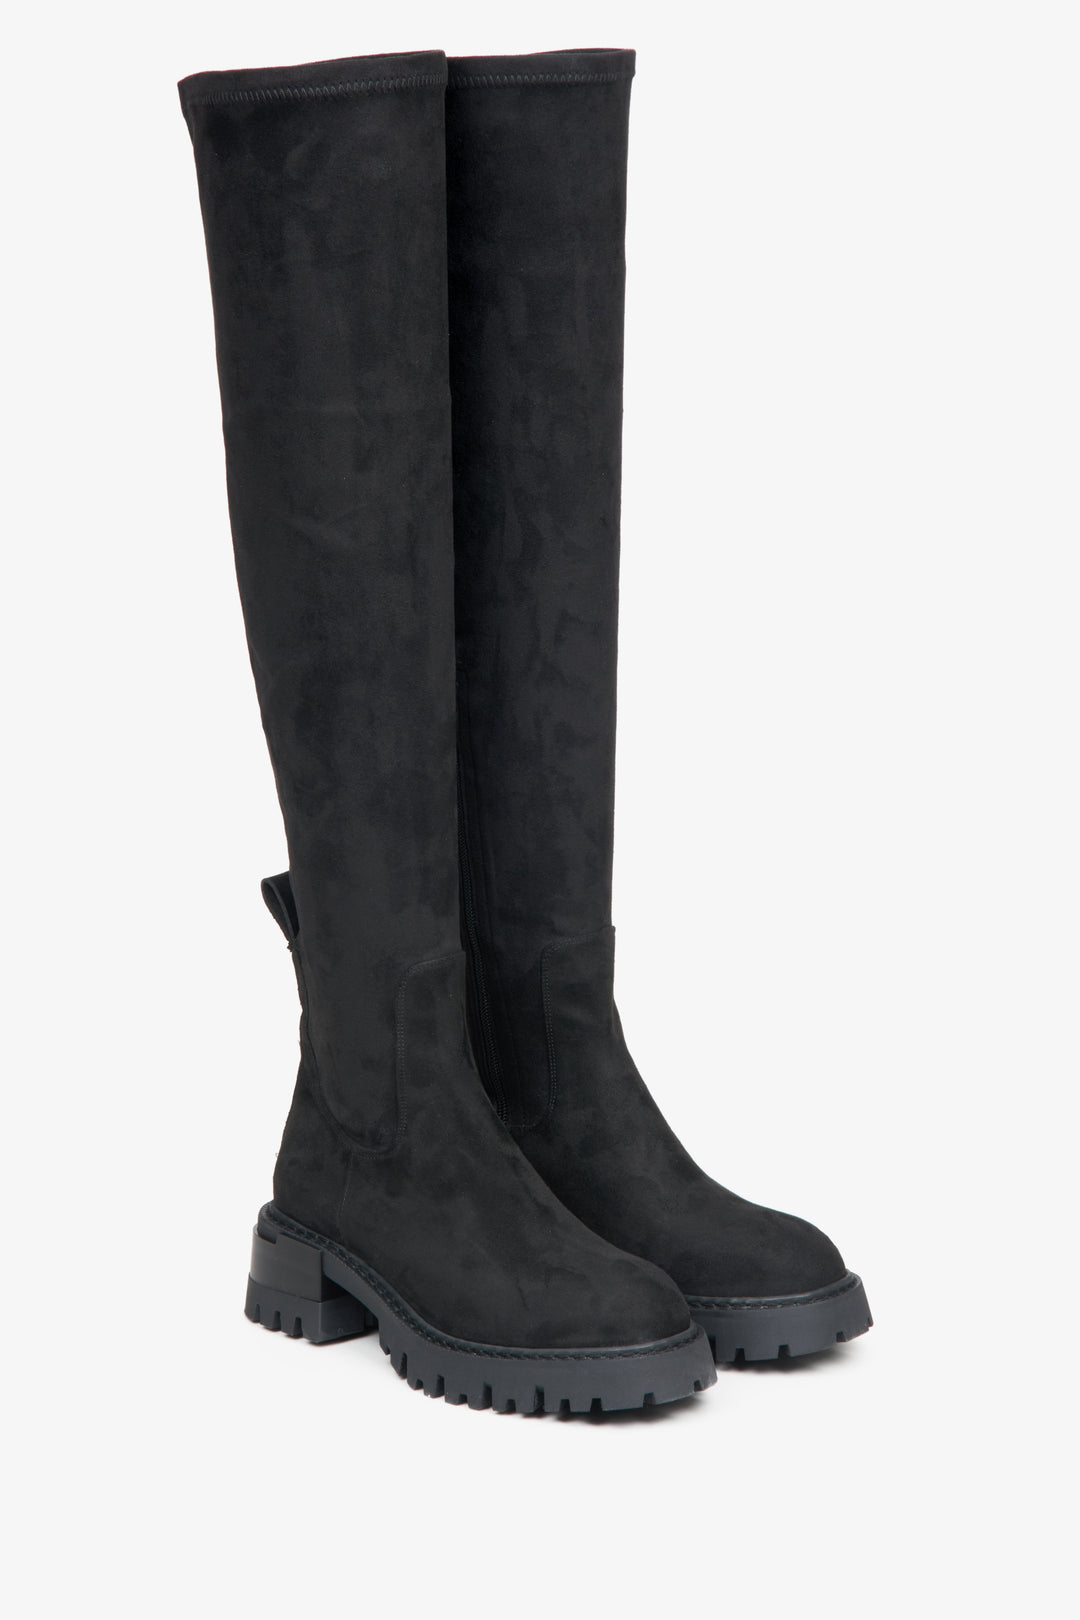 Women's black high-knee boots made of velour with elastic shaft by Estro.